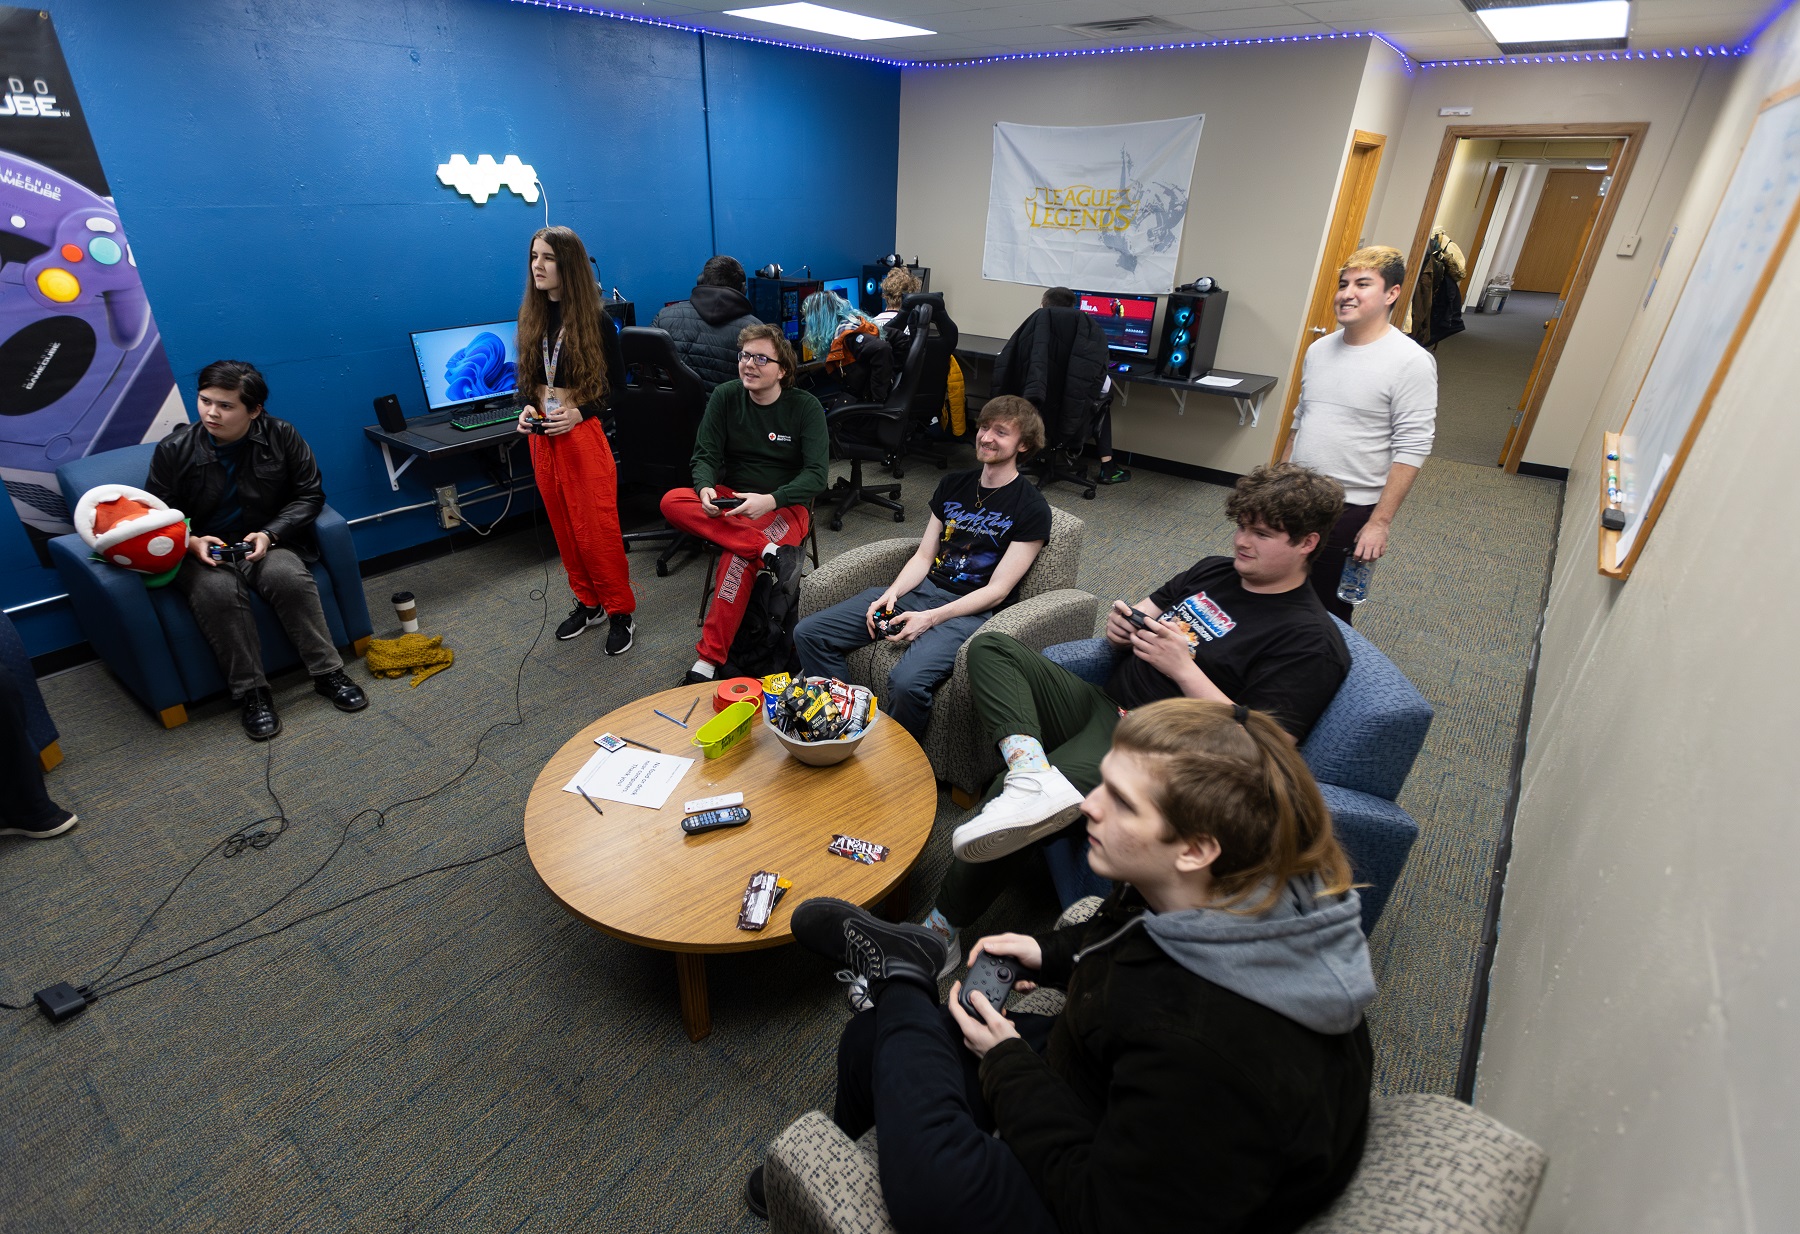 Students gather to play video games in the Esports gaming lounge.